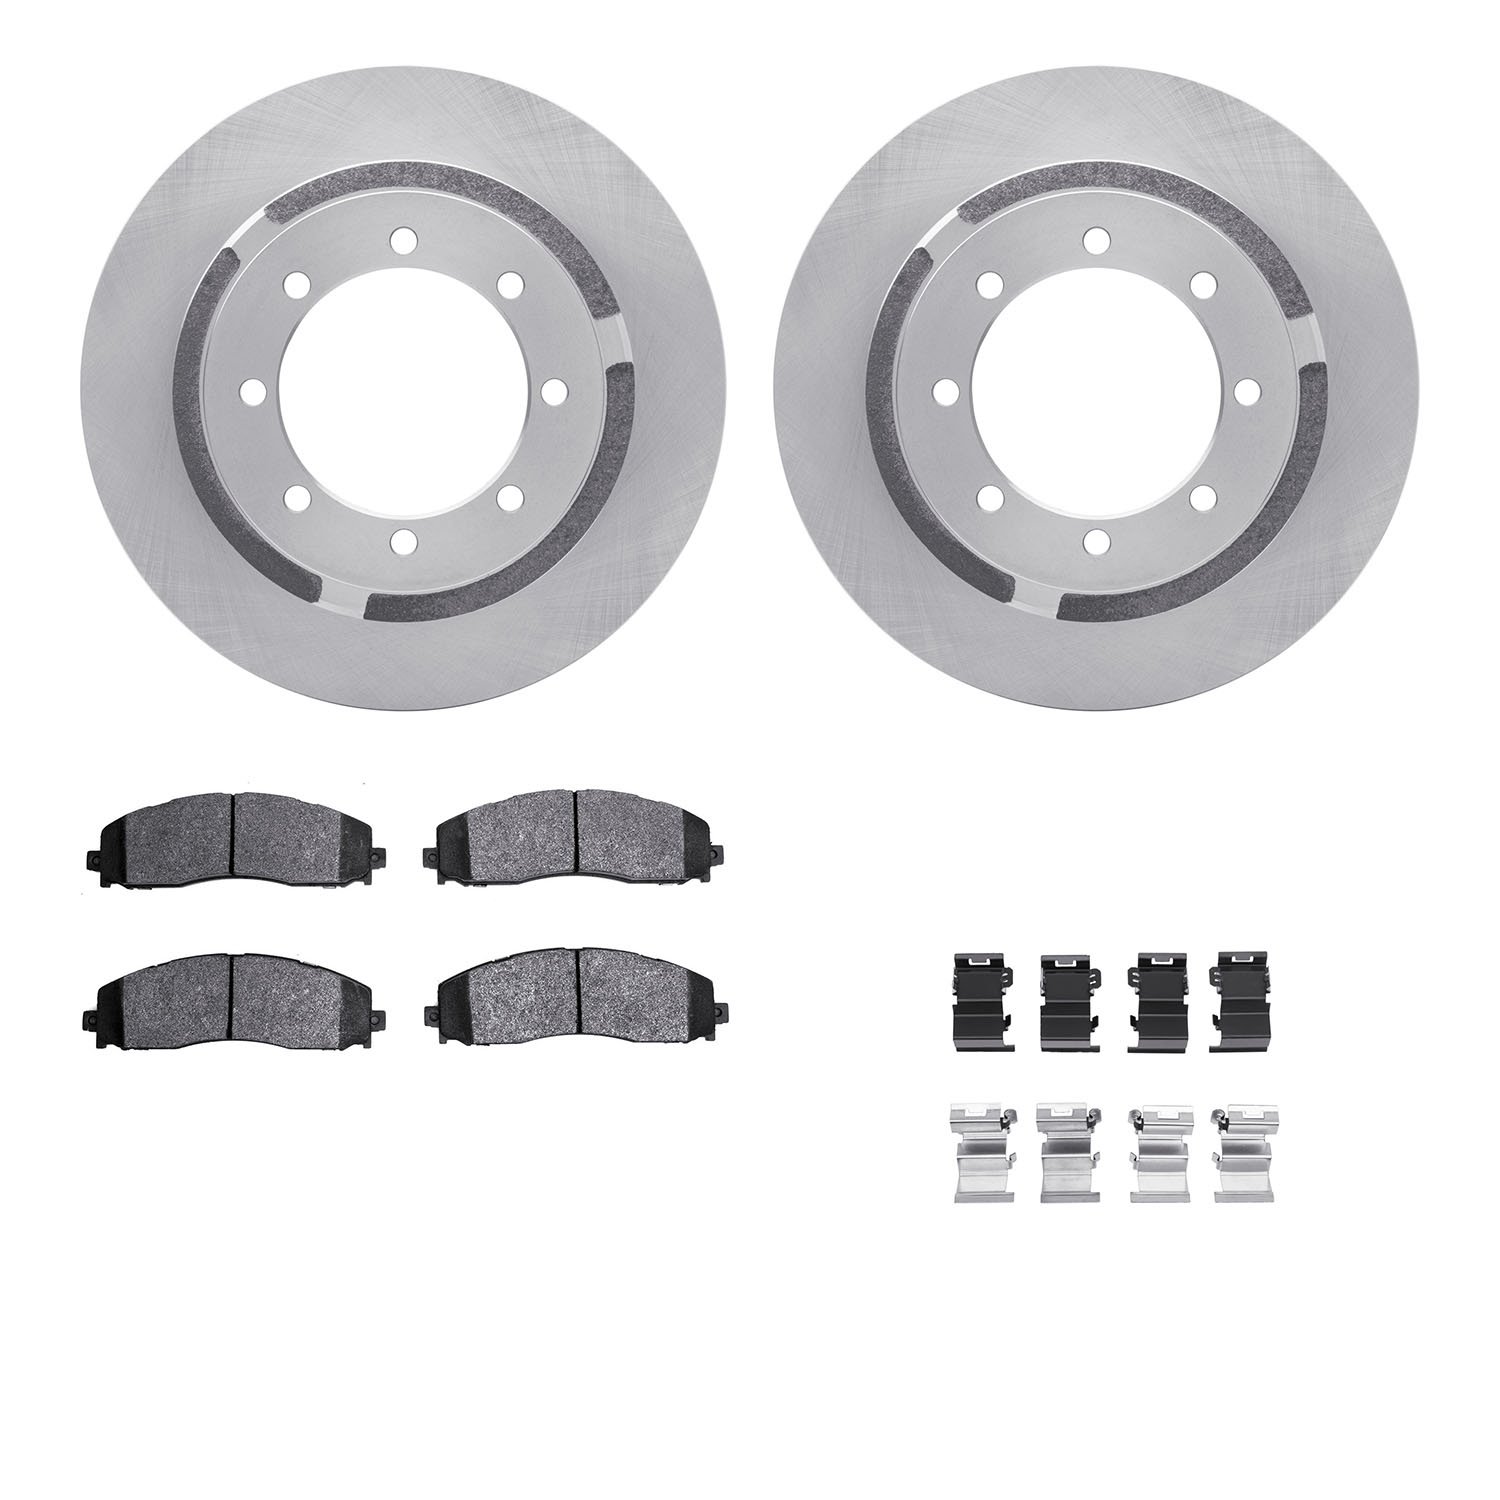 6412-54296 Brake Rotors with Ultimate-Duty Brake Pads Kit & Hardware, Fits Select Ford/Lincoln/Mercury/Mazda, Position: Rear